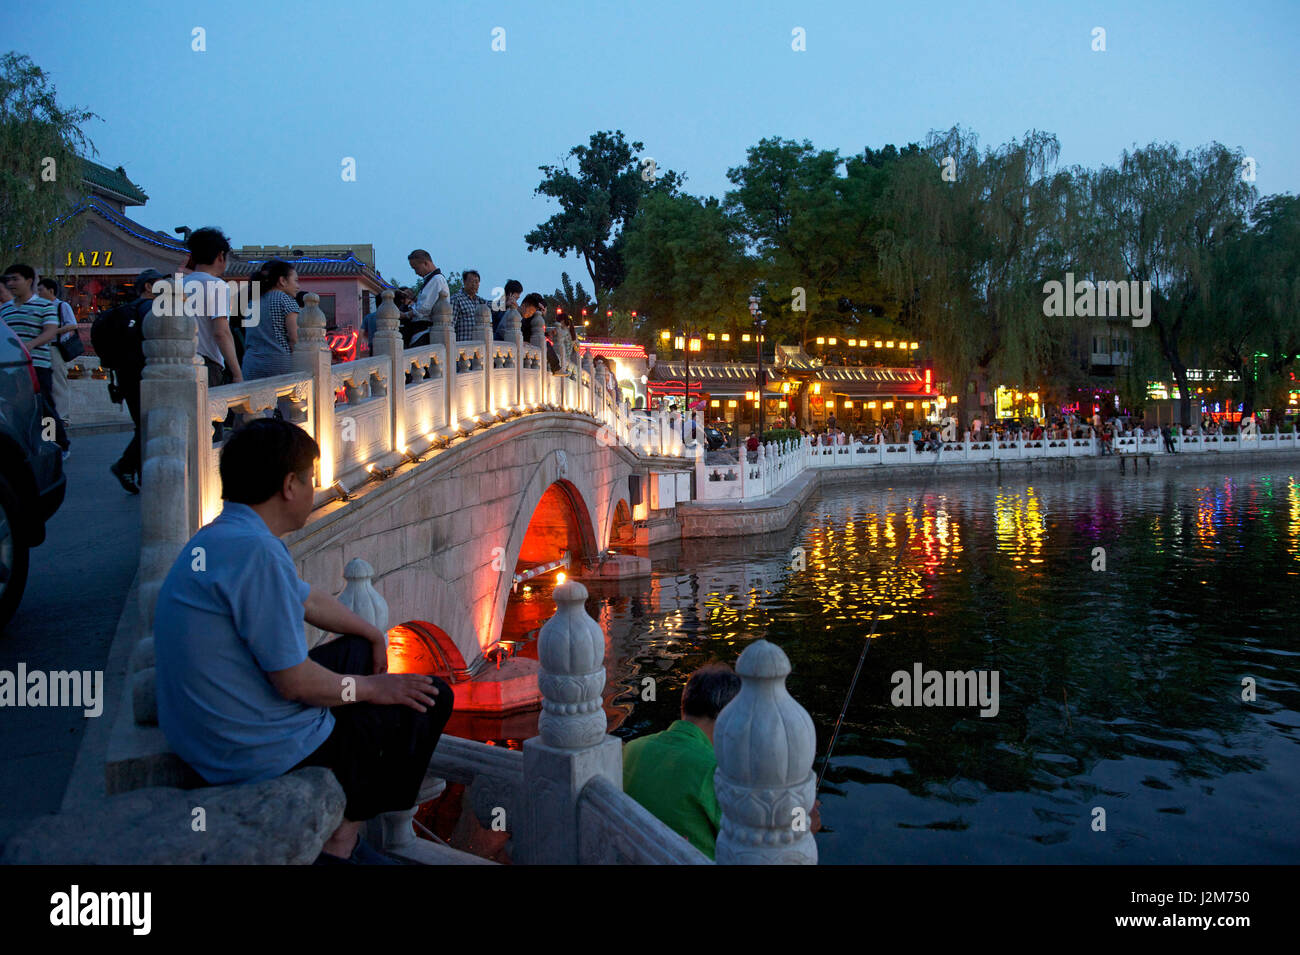 China, Beijing, Xicheng district, nightlife around the Silver bar ...